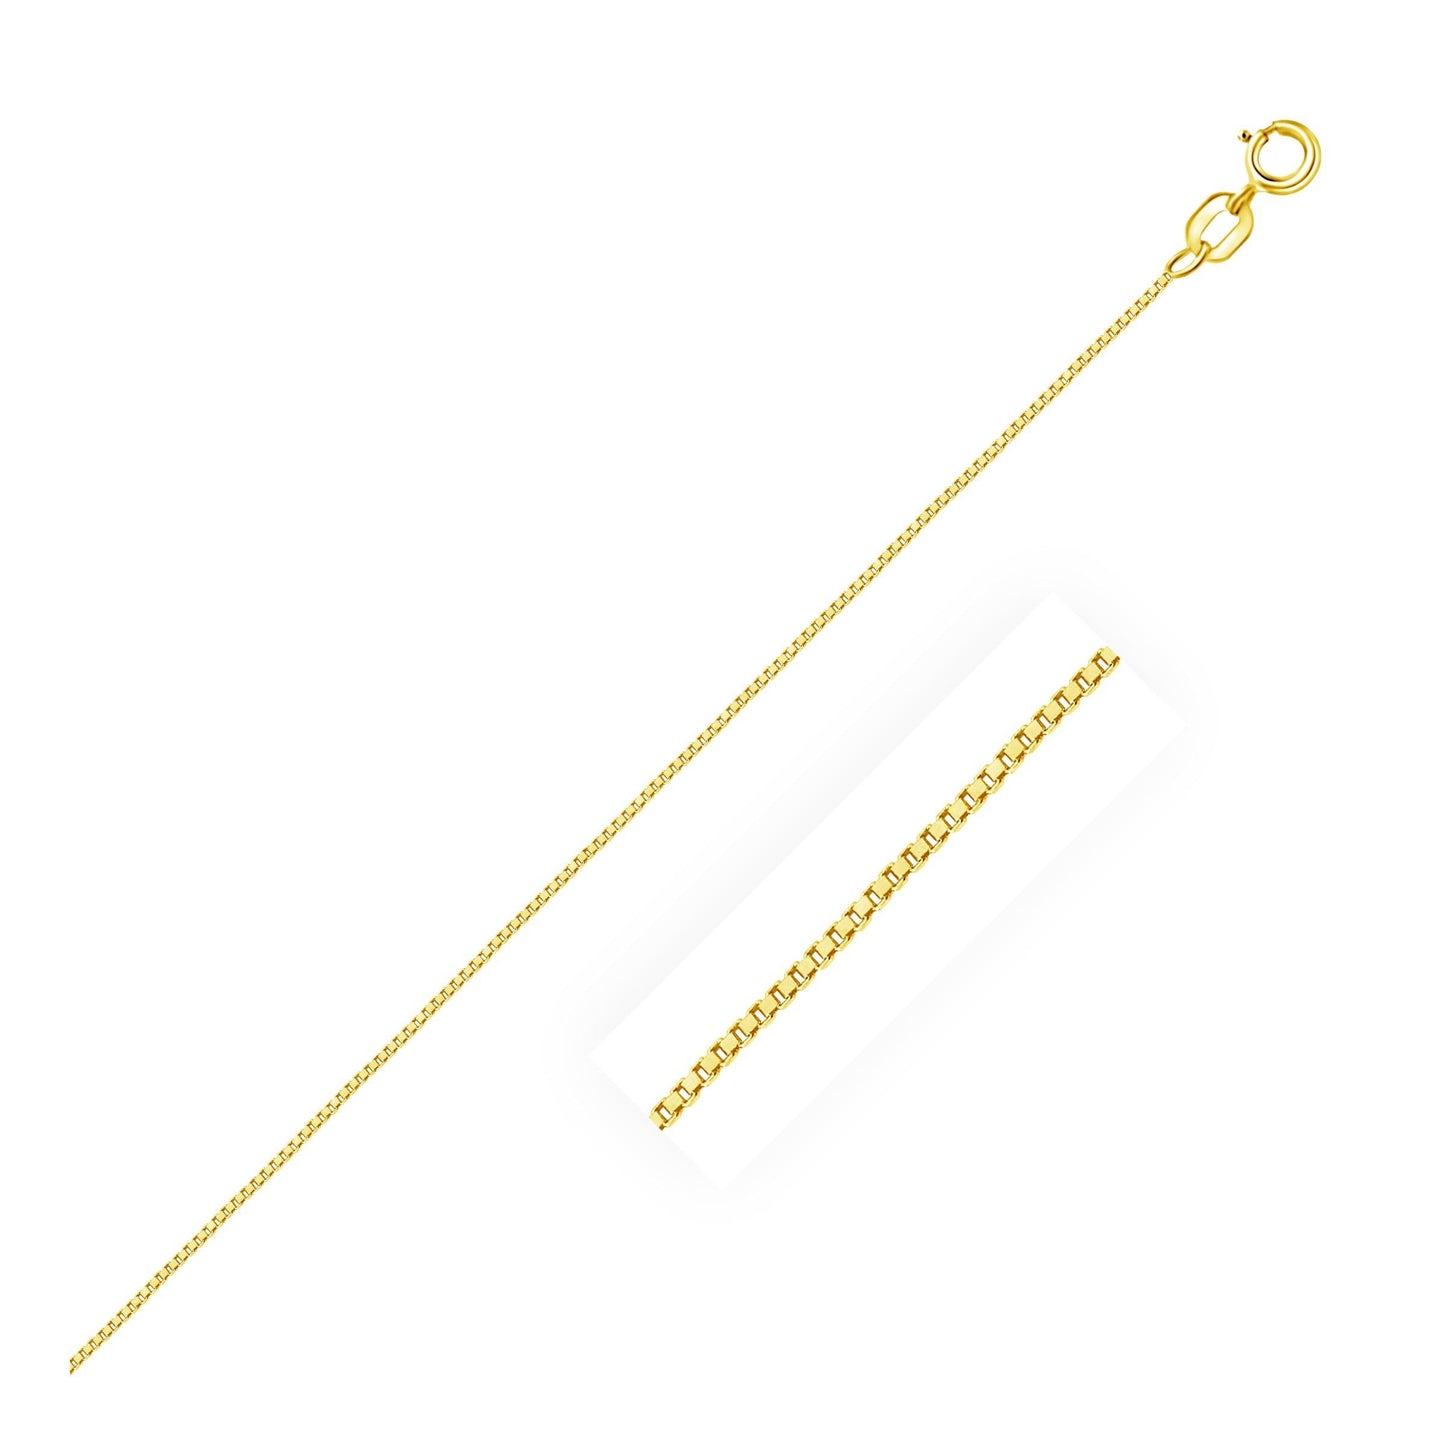 10k Yellow Gold Box Chain in 0.6 mm